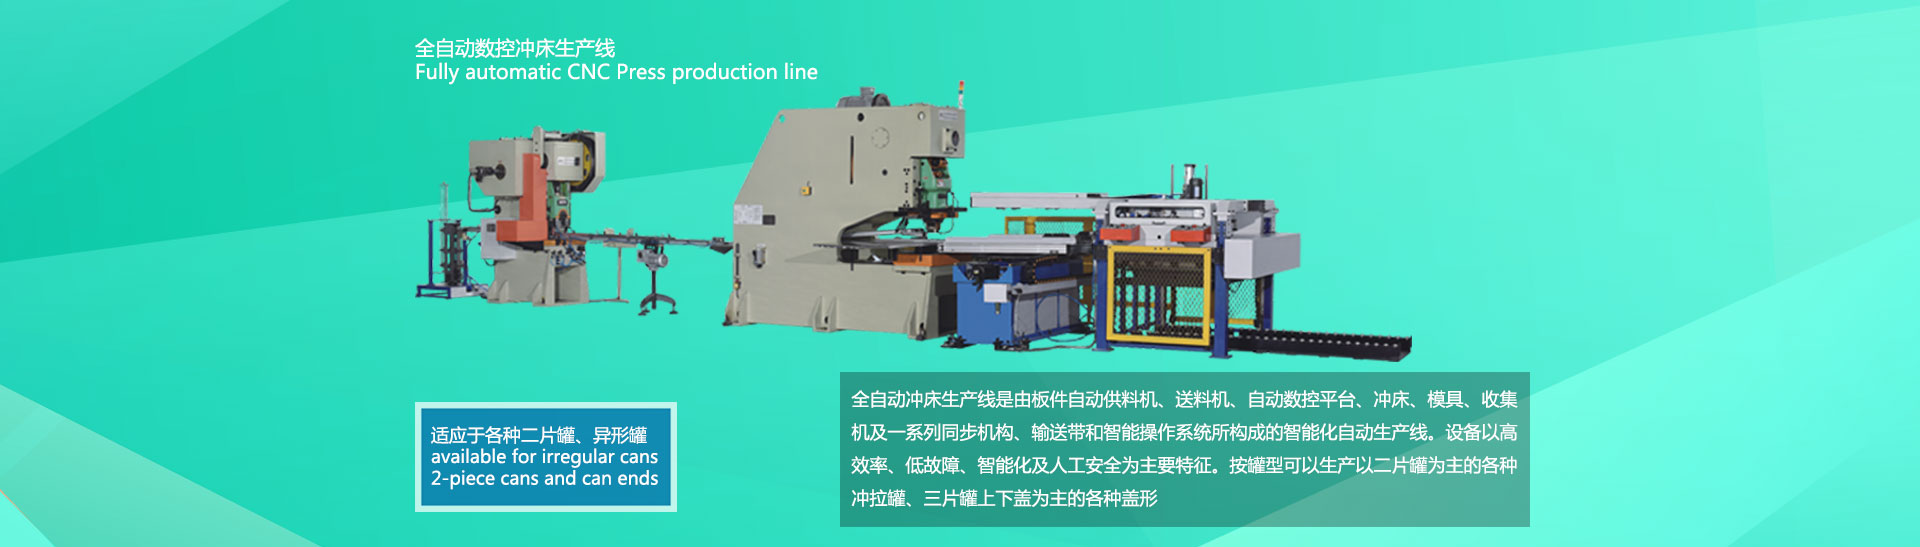  Fully automatic CNC Press production line